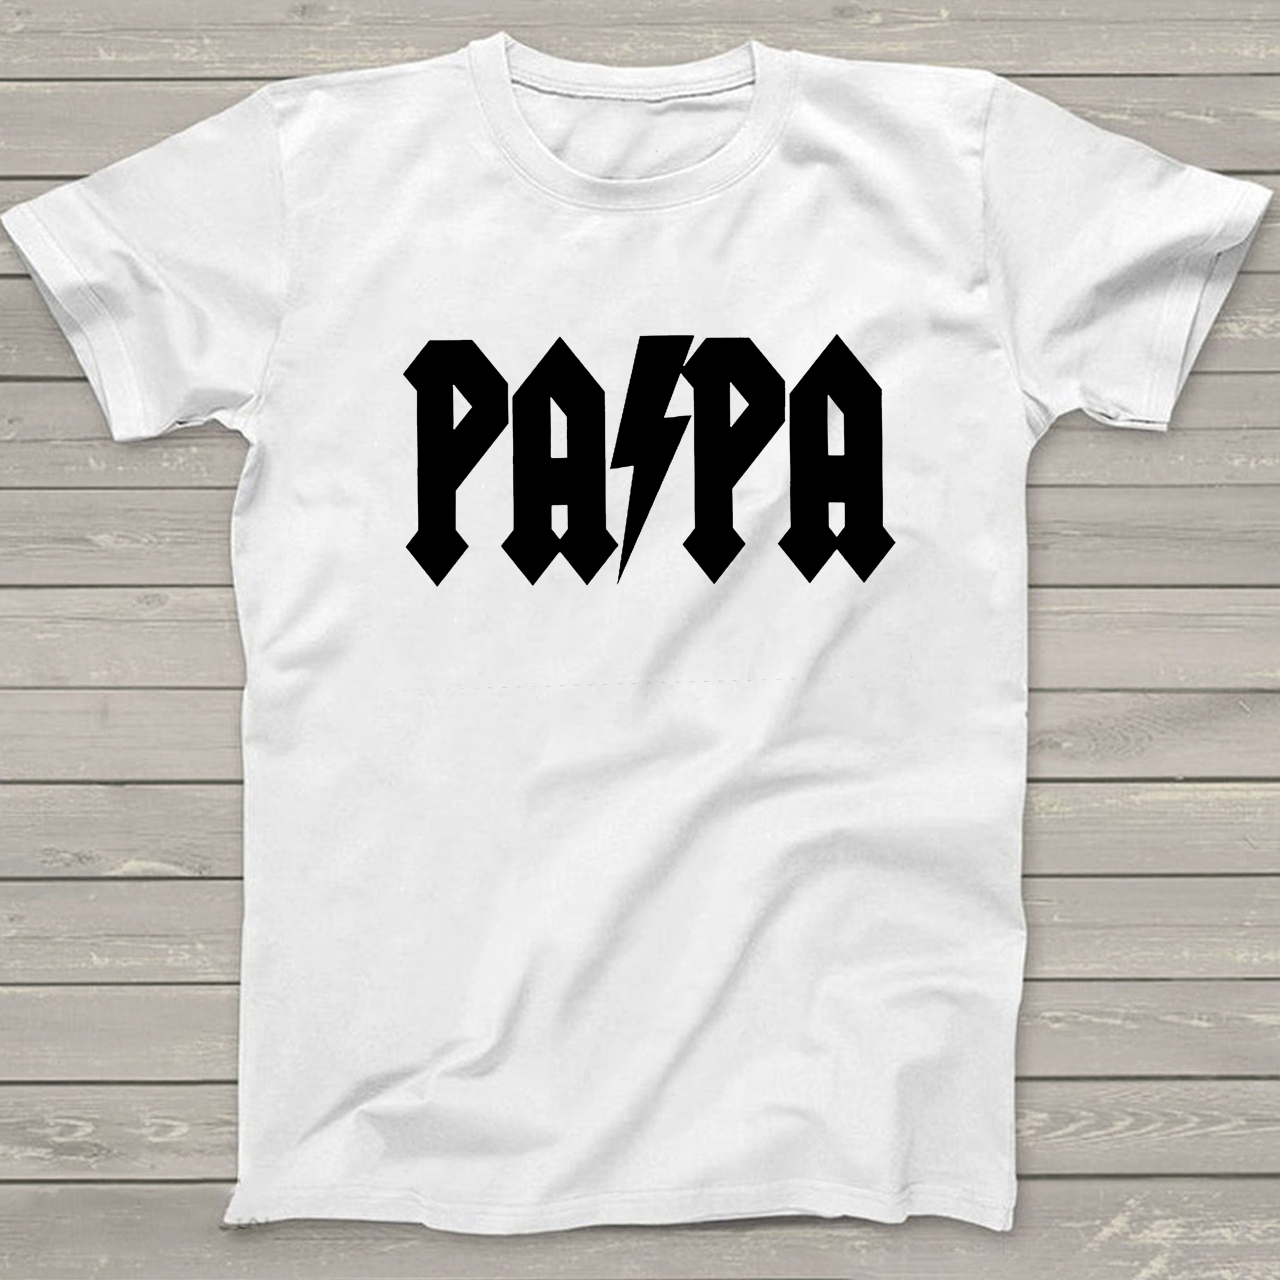 PAPA T-shirt For Father's Day Gift Dad T-shirt